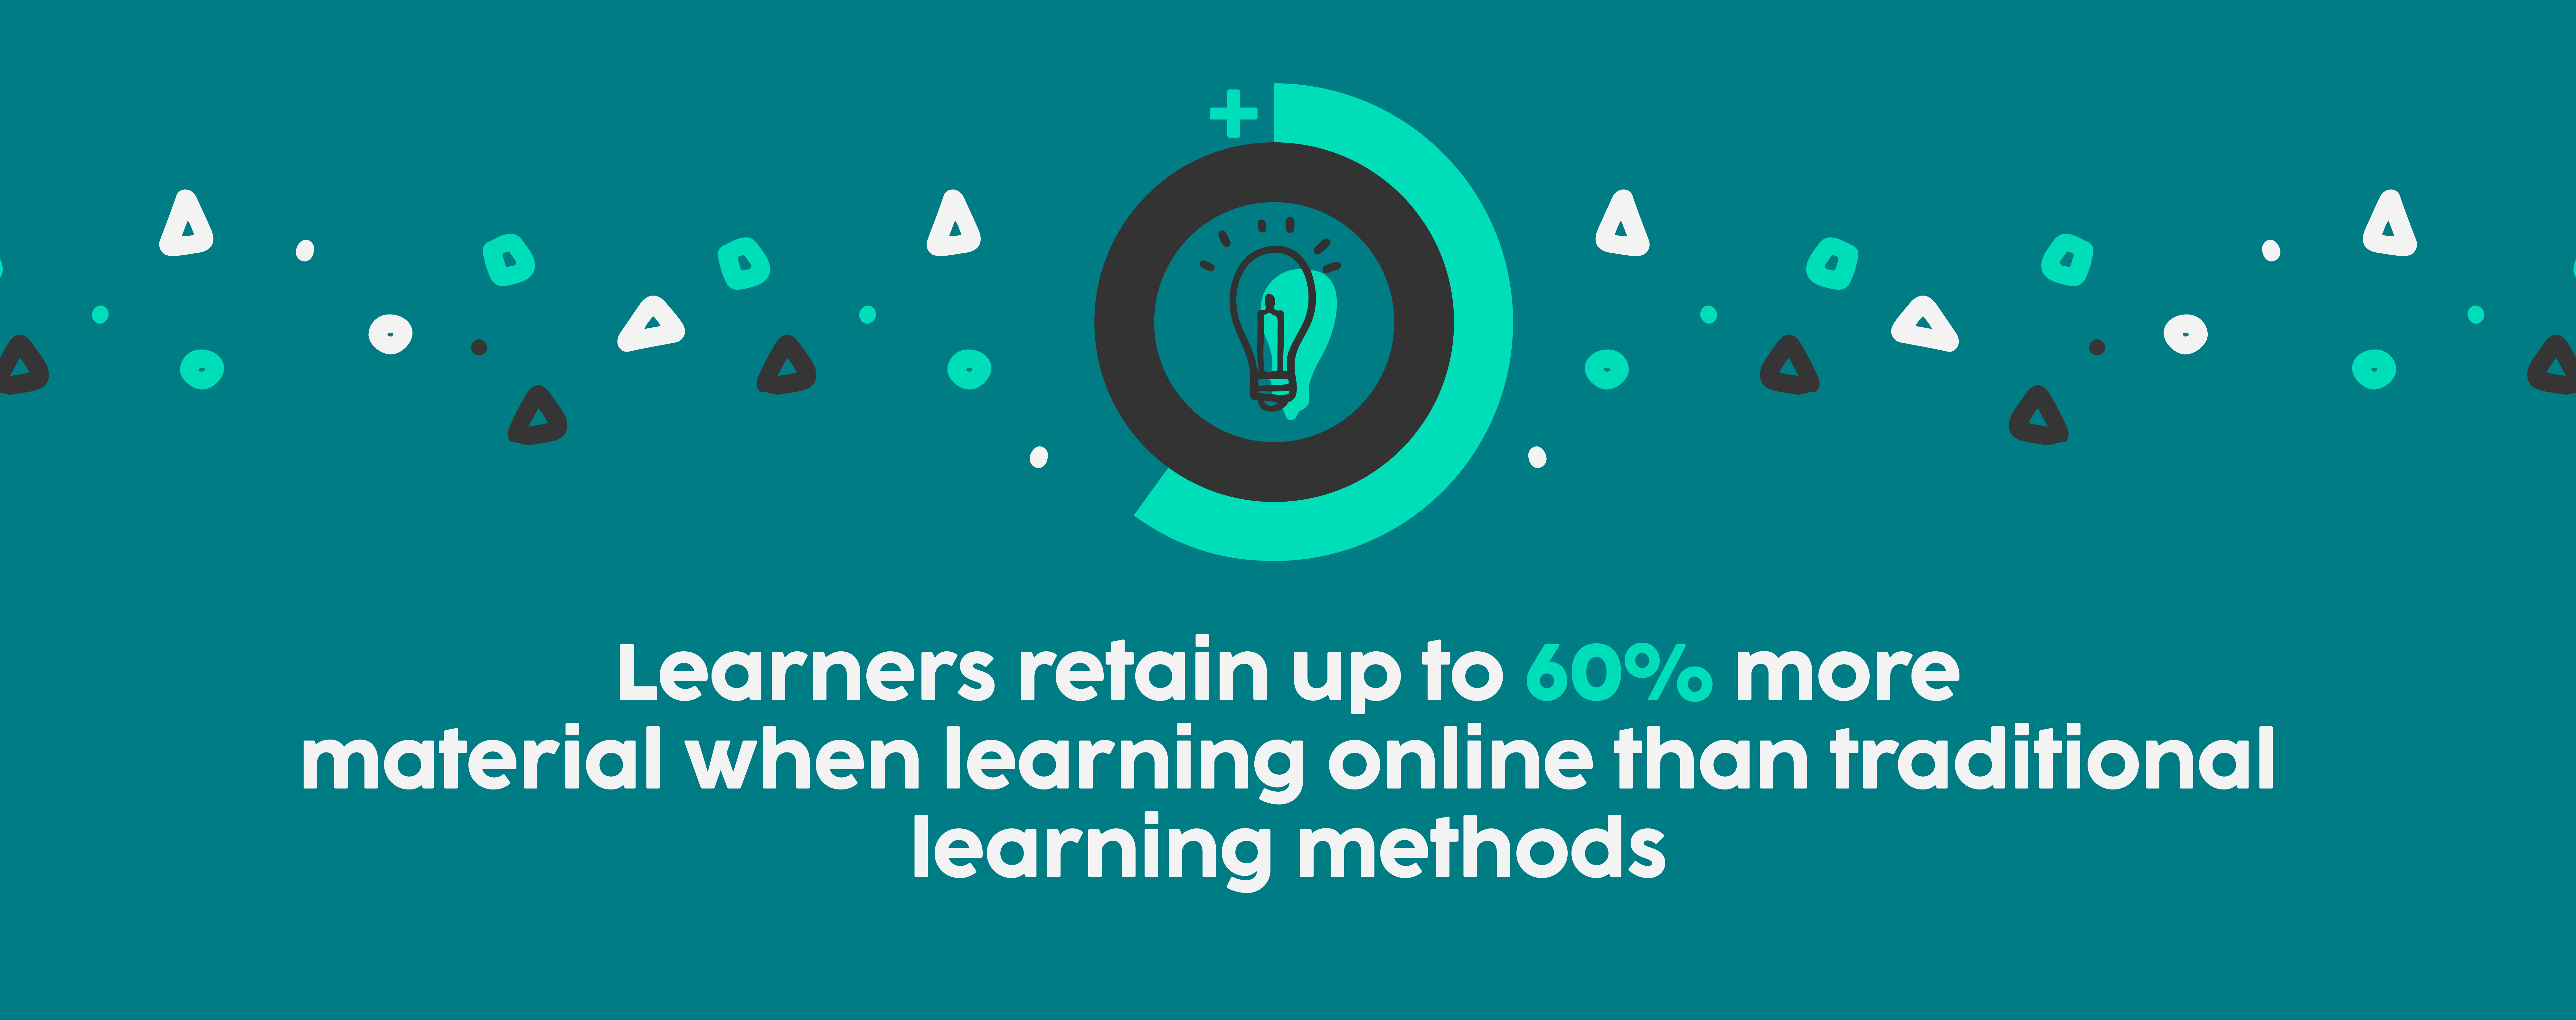 Research has revealed that learners retain up to 60% more material when learning online than traditional learning methods